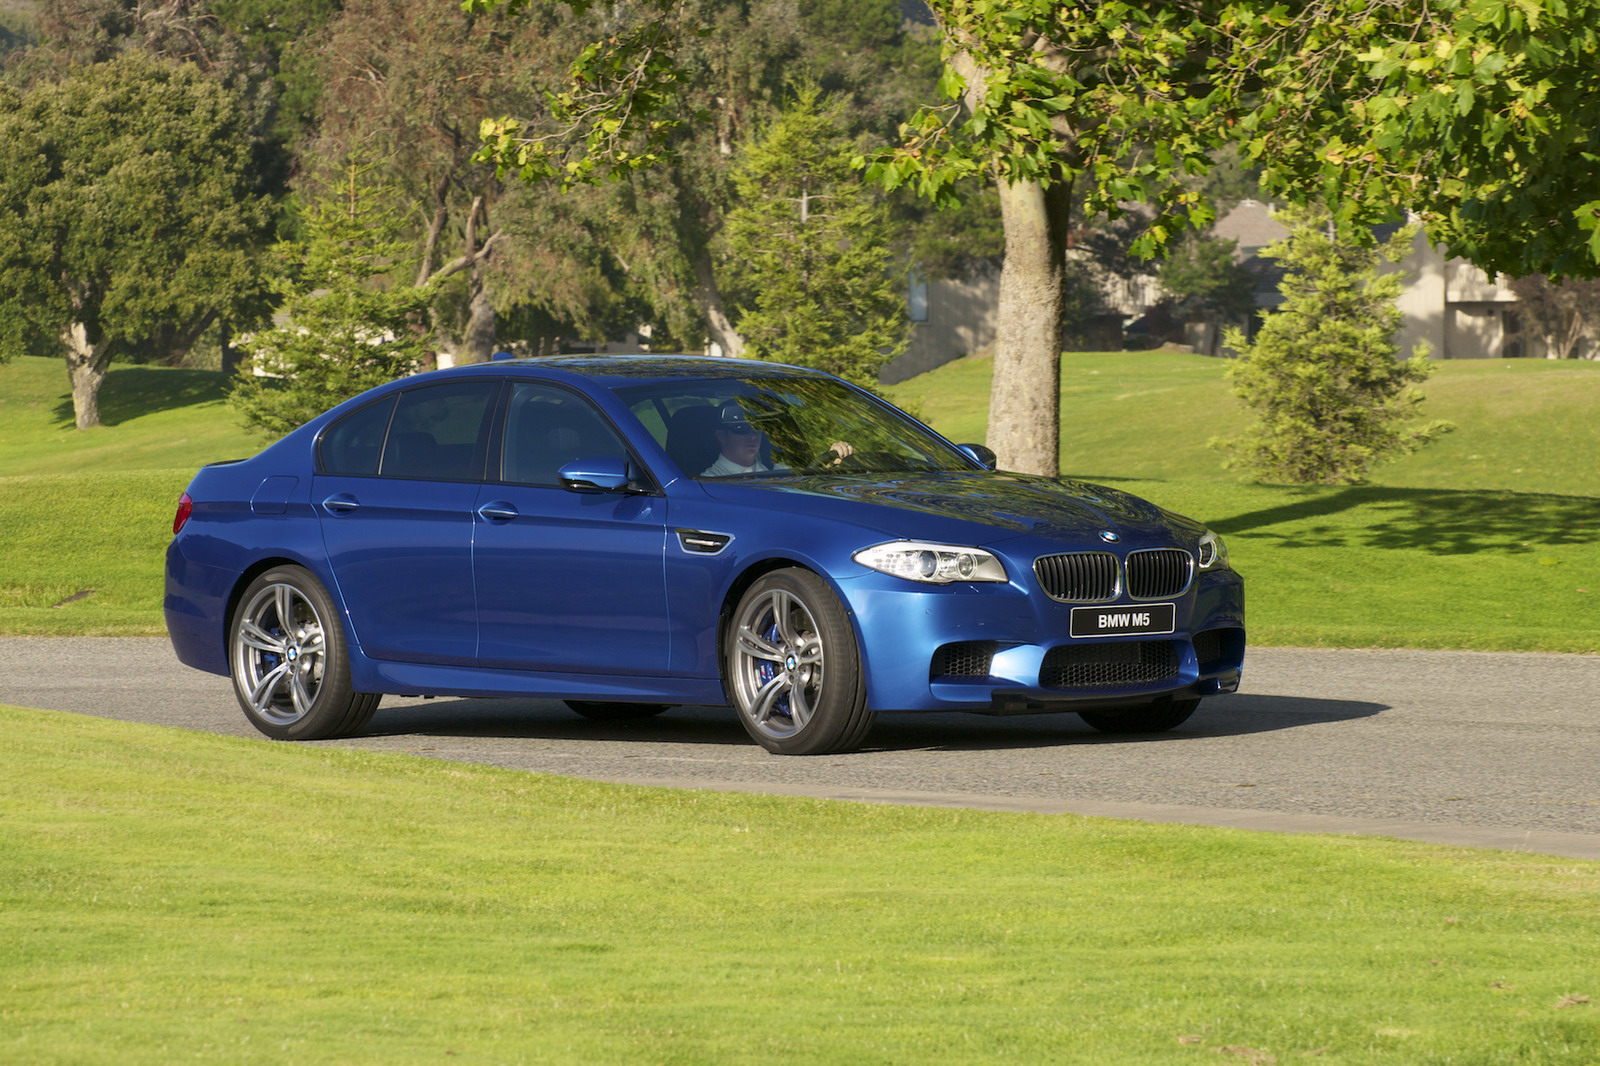 F10 BMW M5 has more to say and do